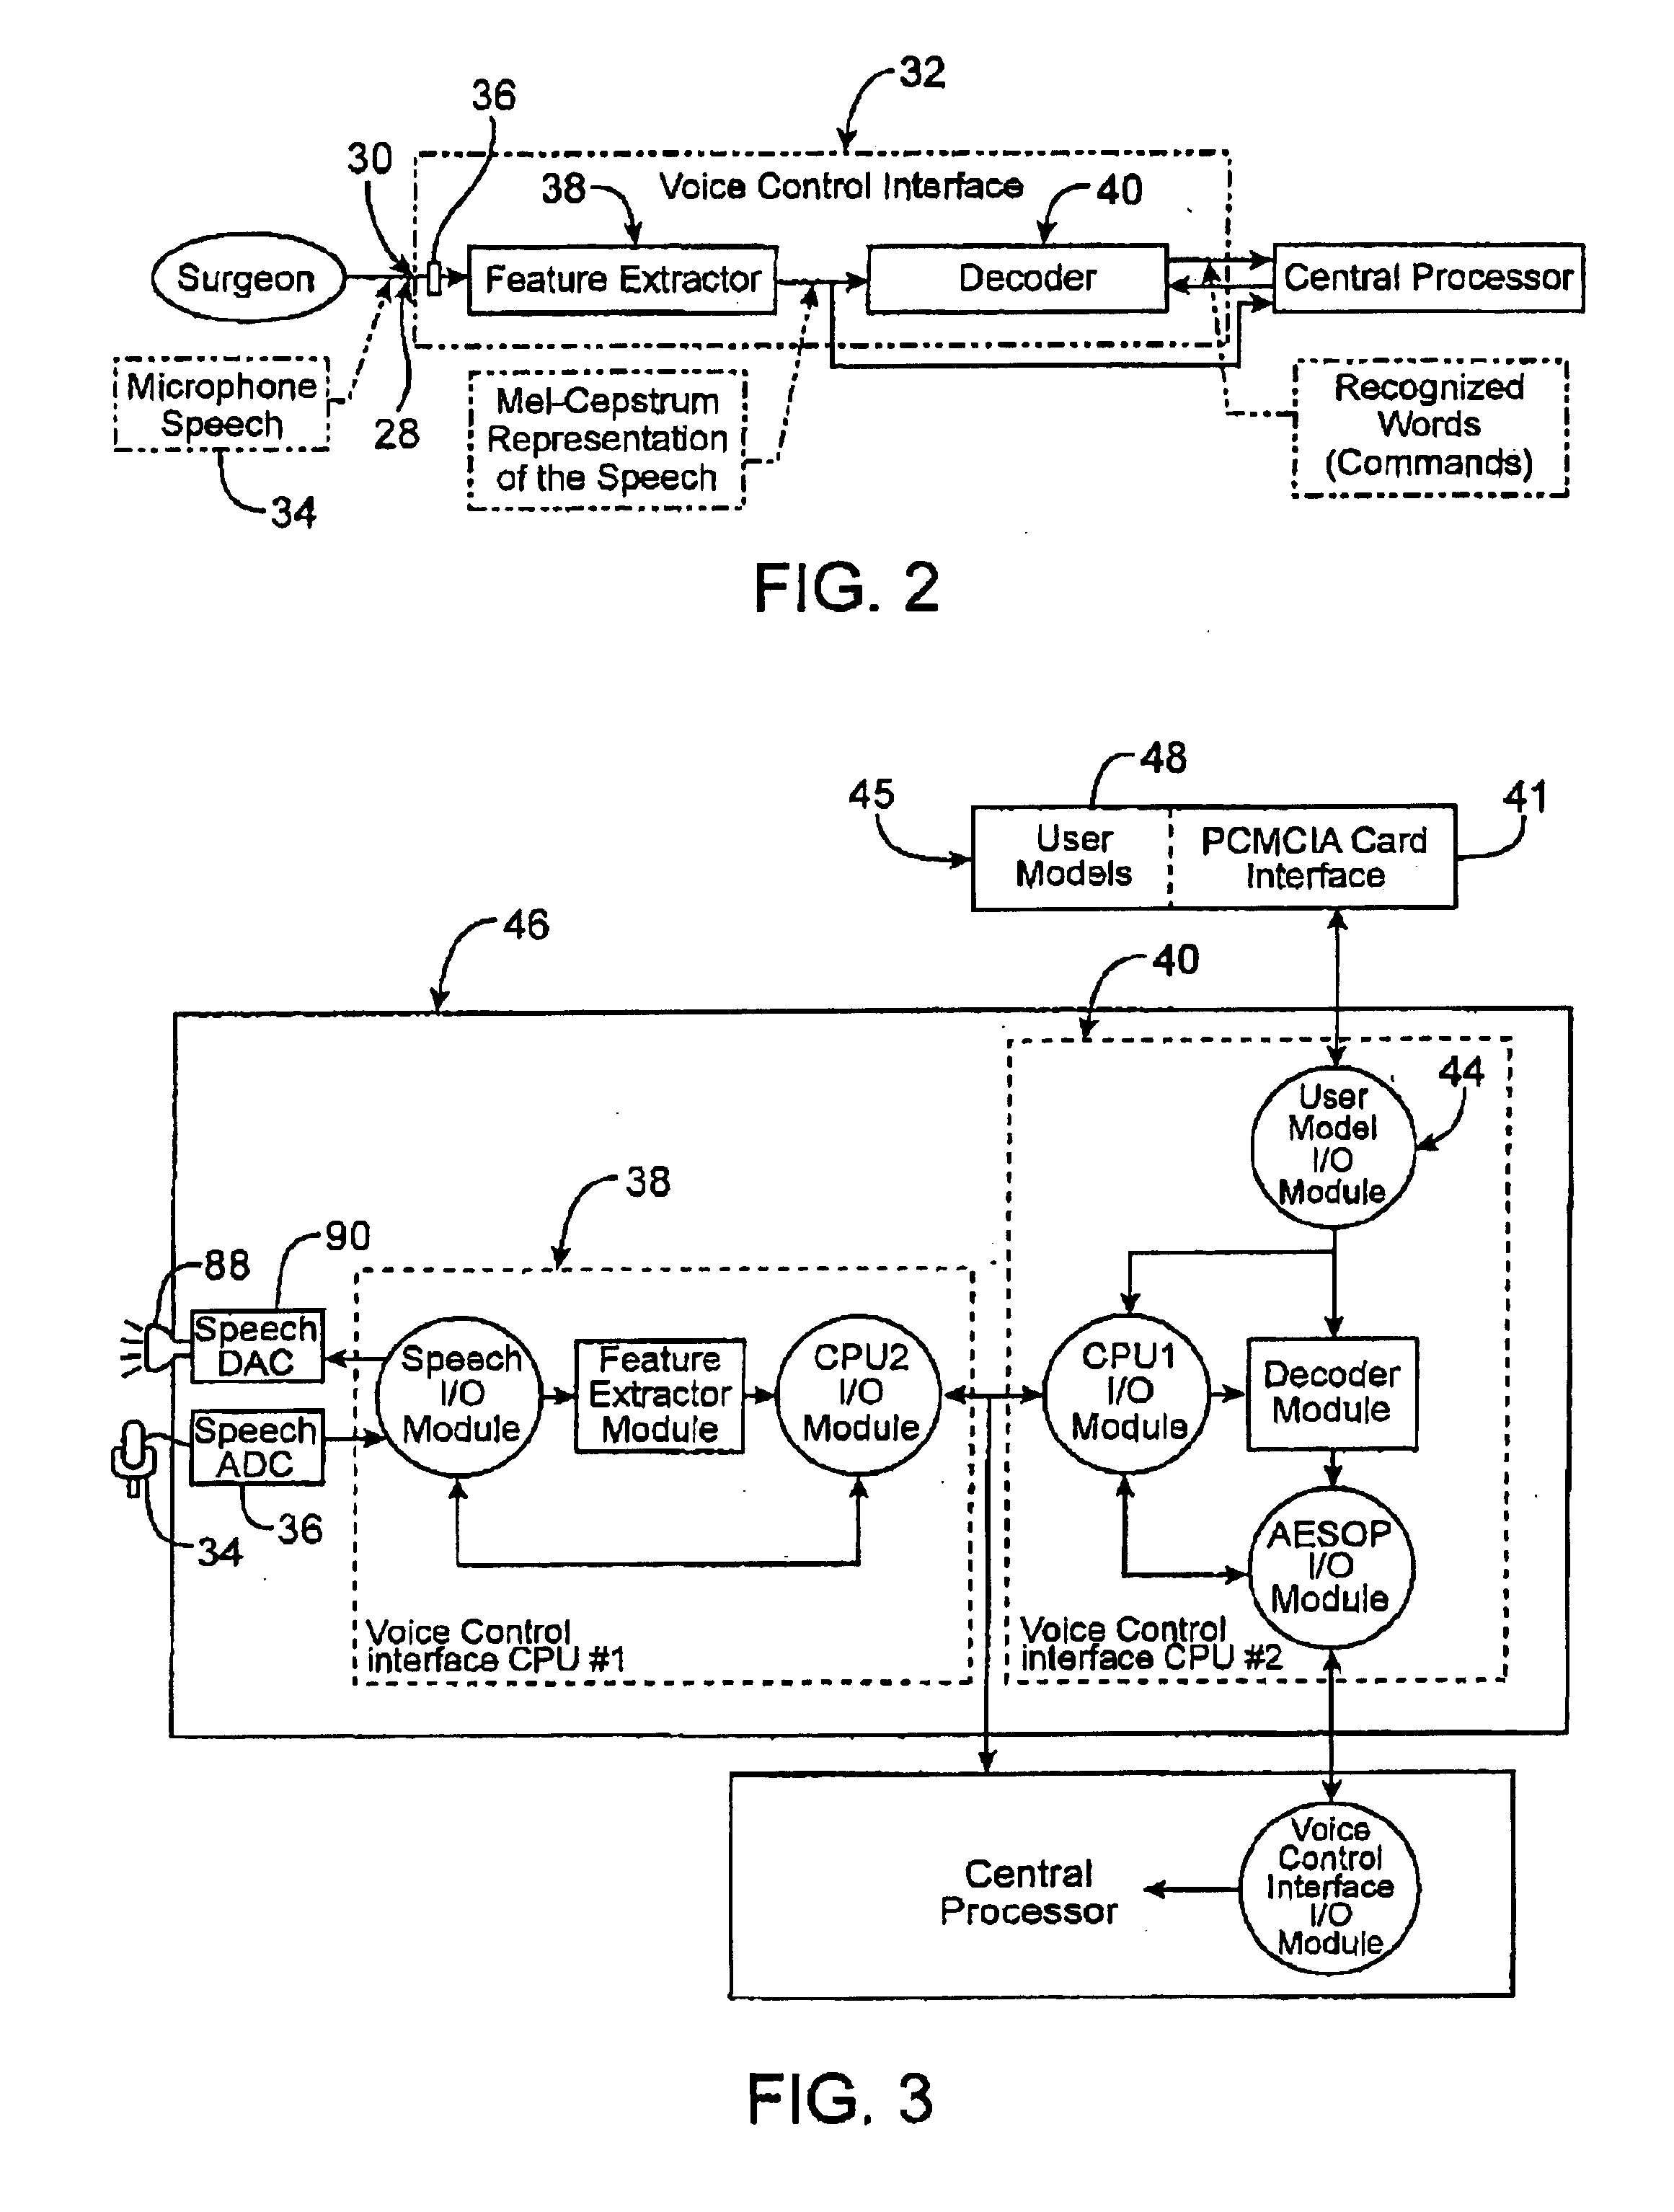 Method and apparatus for accessing medical data over a network